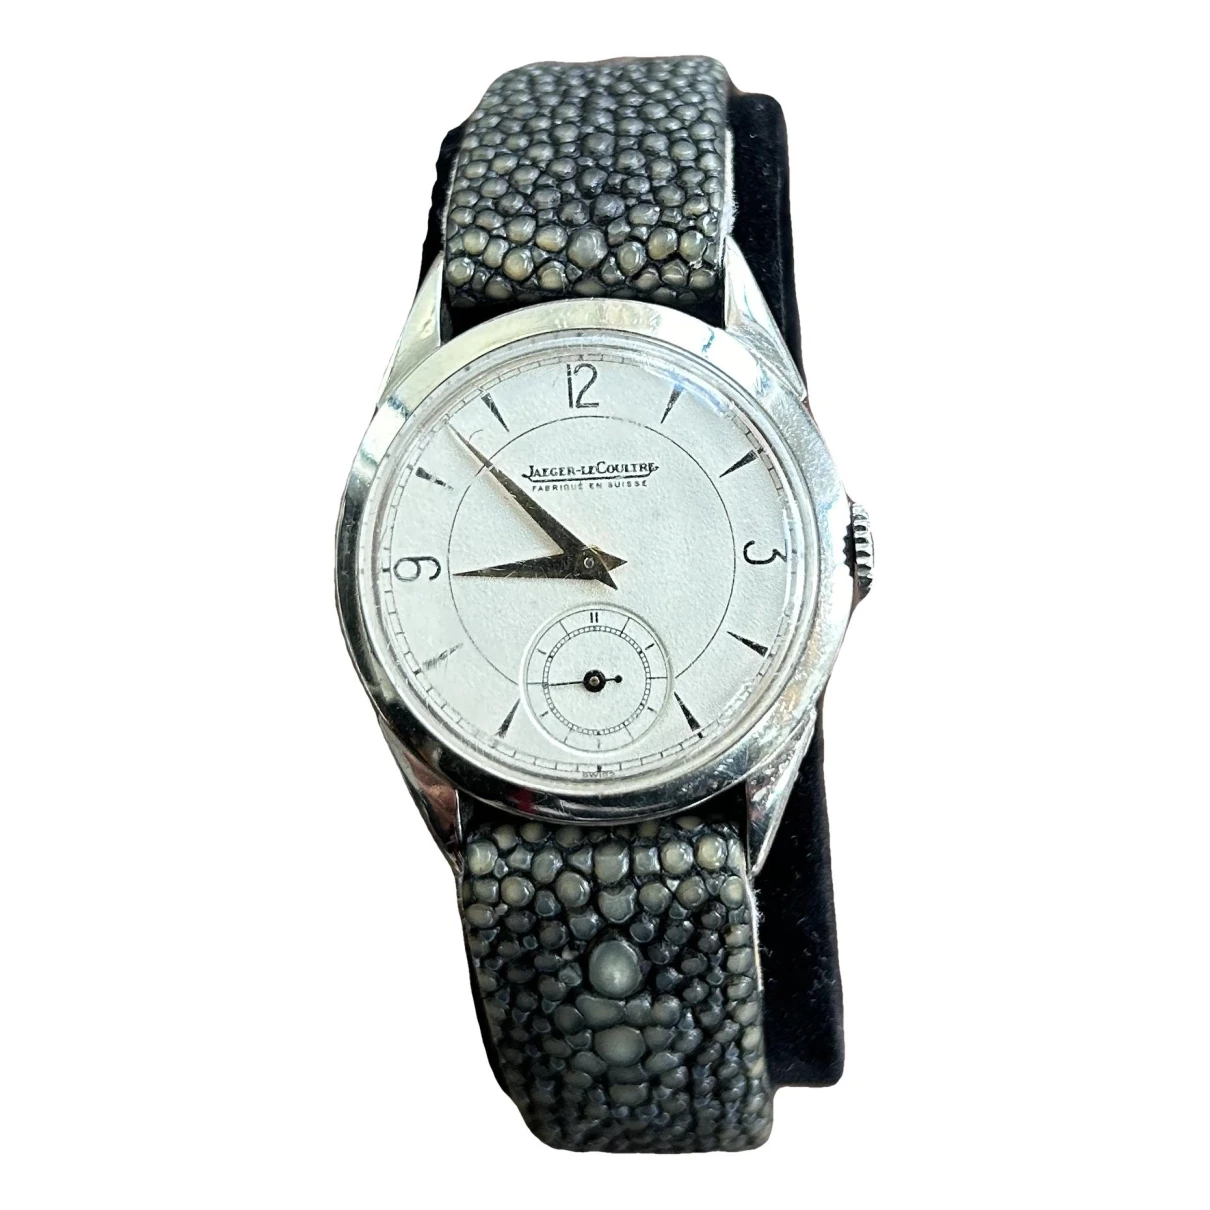 Pre-owned Jaeger-lecoultre Vintage Watch In Silver